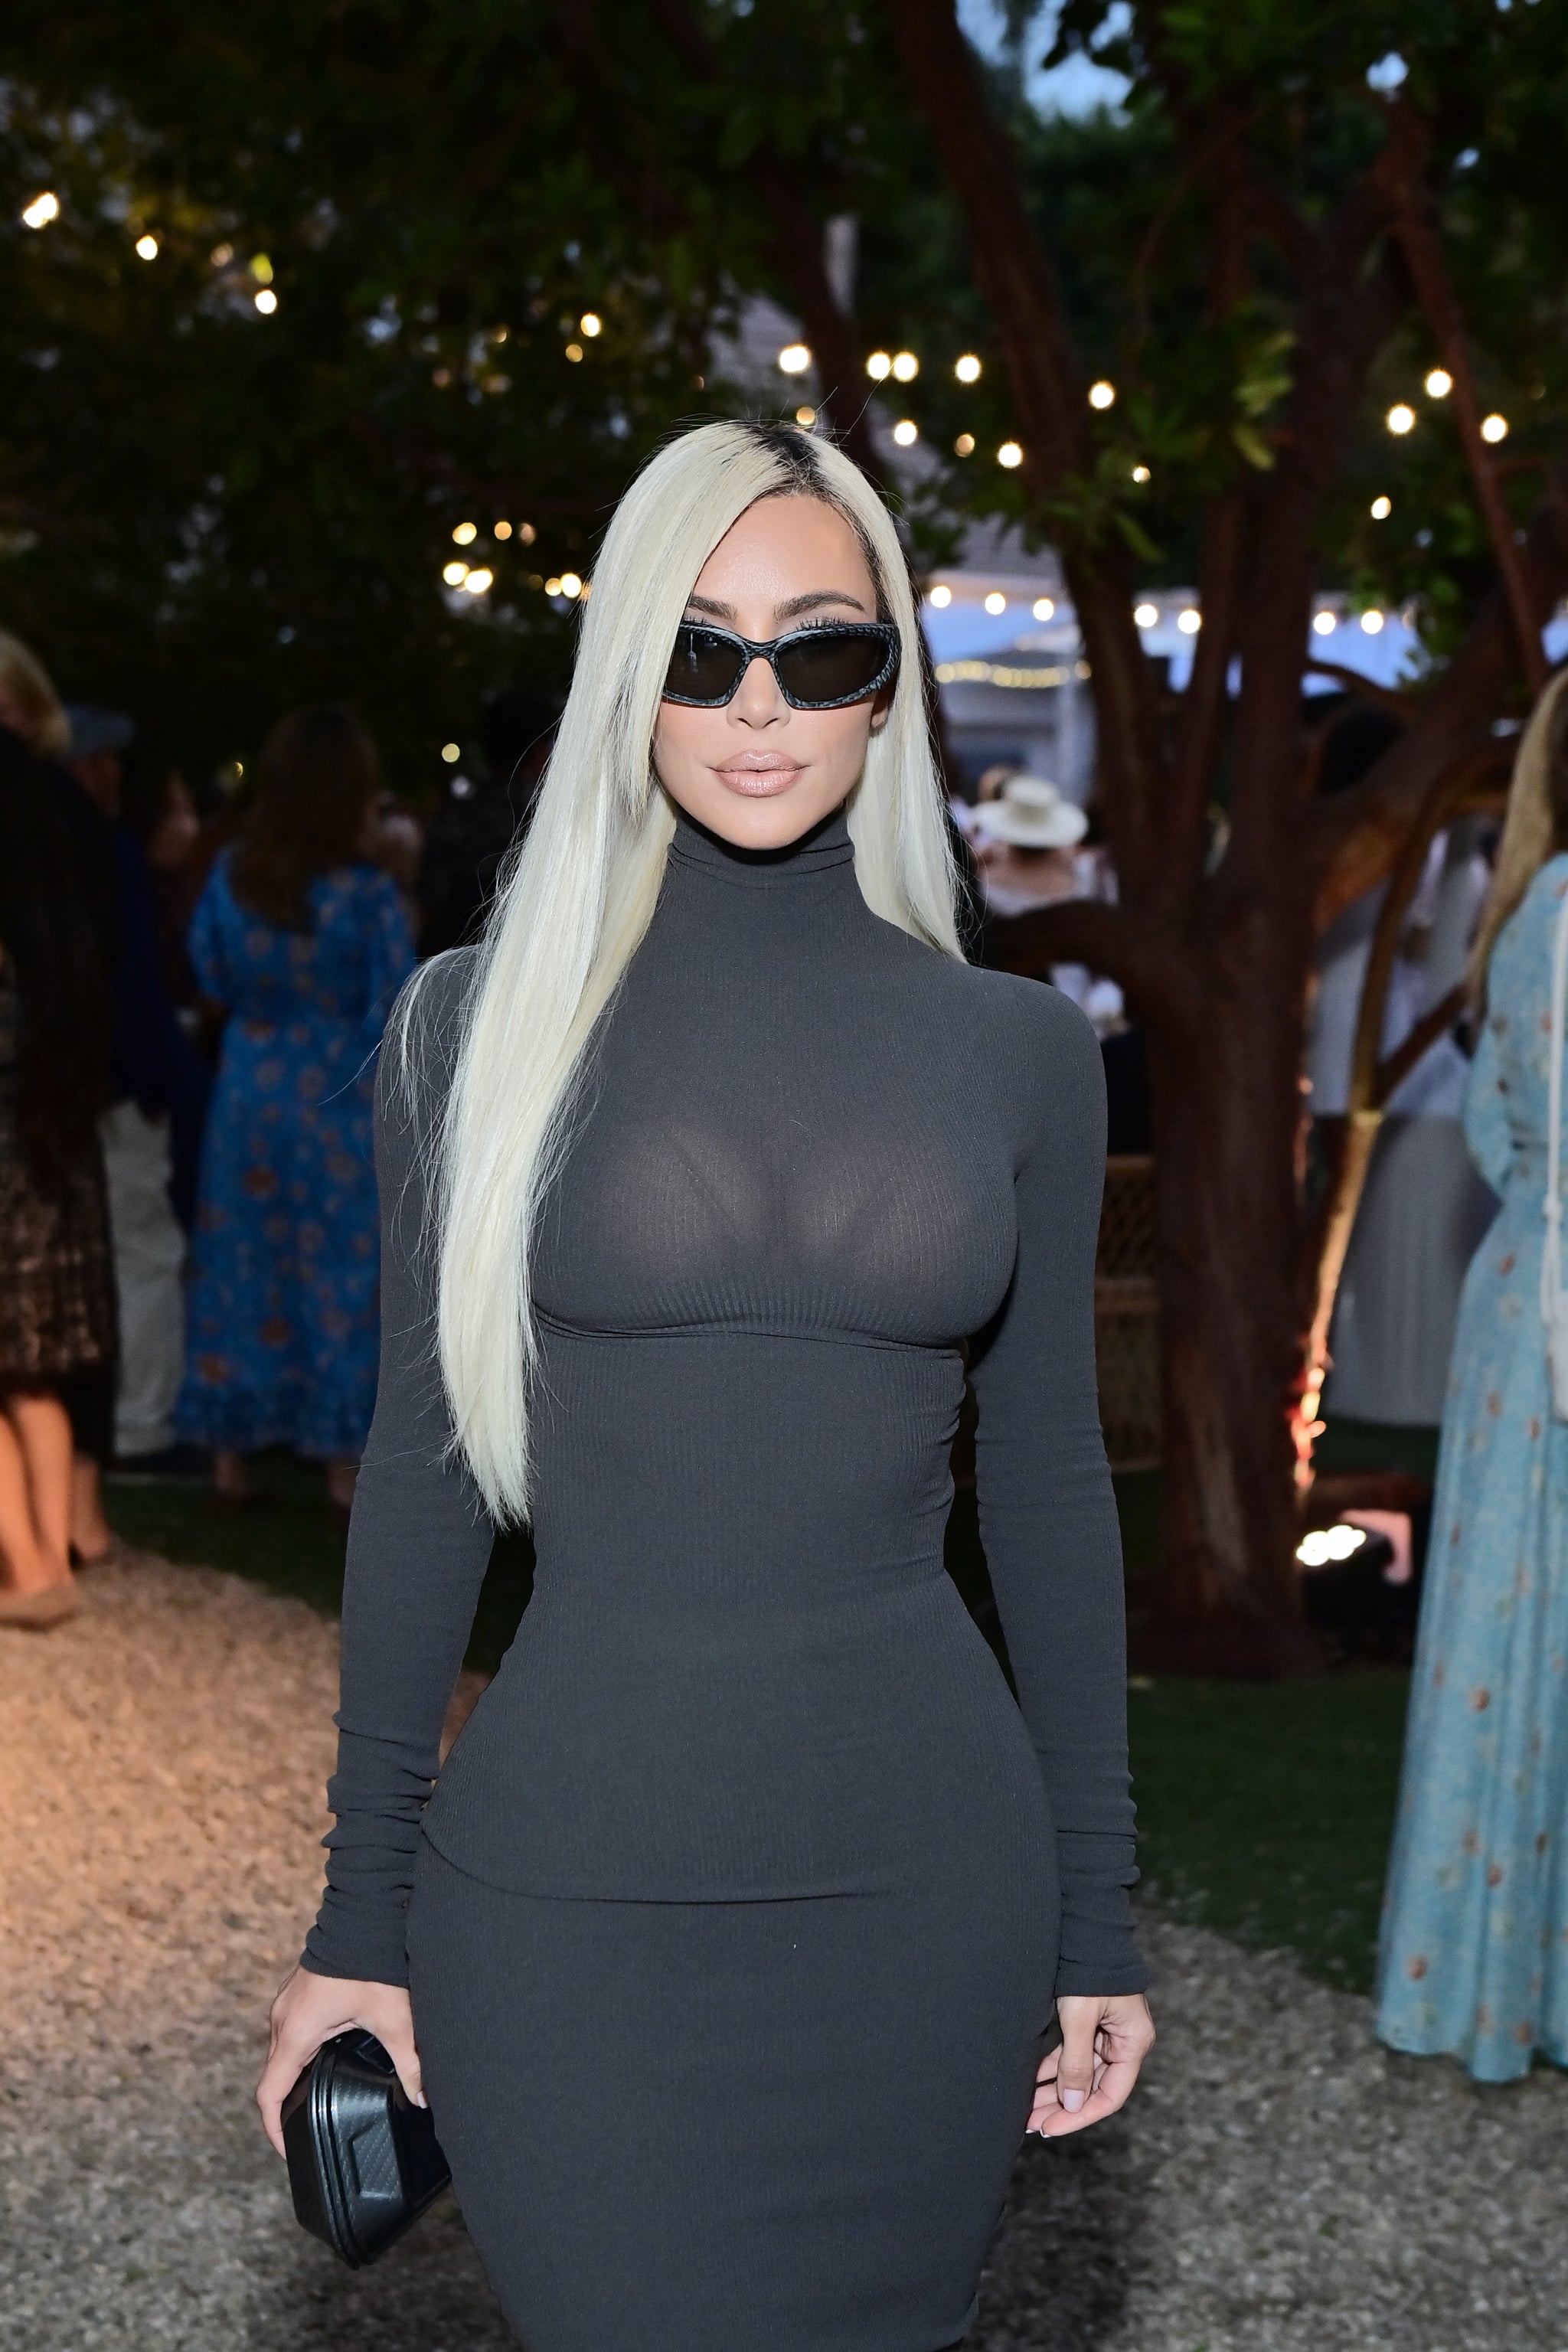 LOS ANGELES, CALIFORNIA - AUGUST 27: Kim Kardashian attends the TIAH 4th Annual Fundraiser at Private Residence on August 27, 2022 in Los Angeles, California. (Photo by Stefanie Keenan/Getty Images for This Is About Humanity)